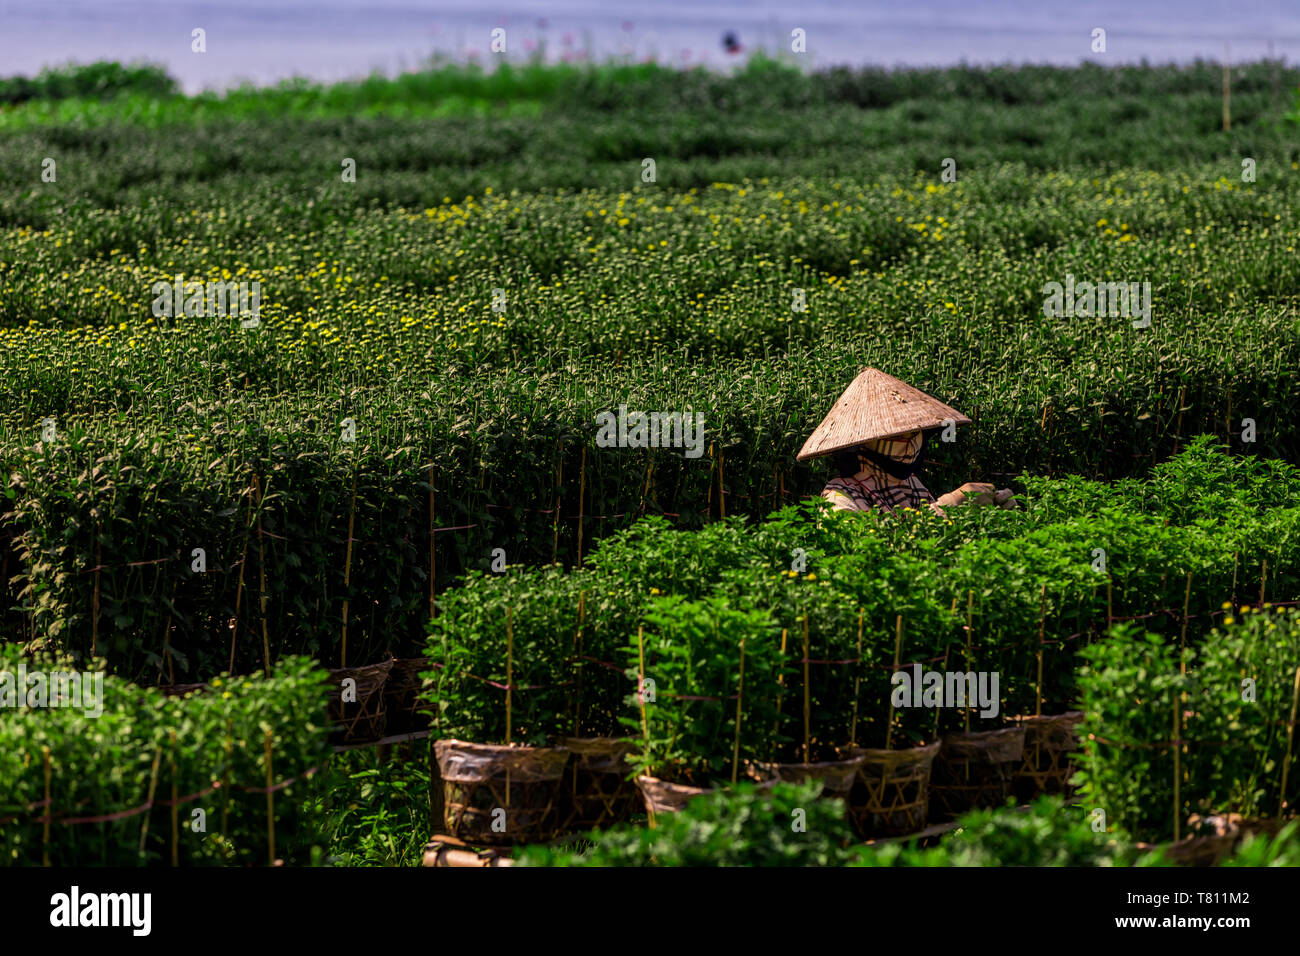 Village farmers in the Mekong Delta away from the intense city life of Saigon, Vietnam, Indochina, Southeast Asia, Asia Stock Photo